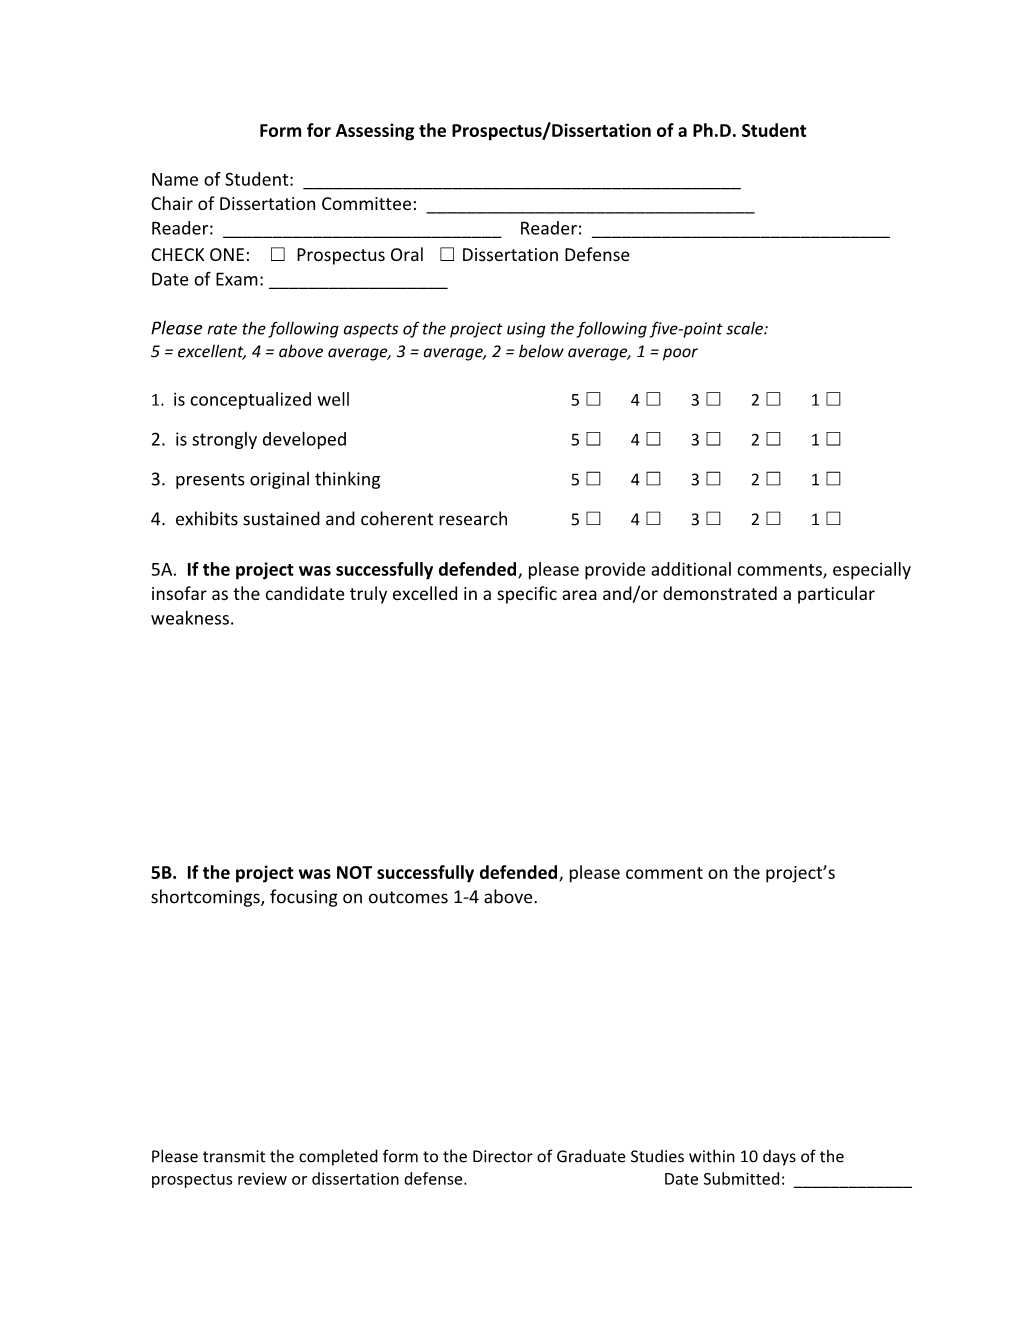 Form for Assessing the Prospectus/Dissertation of a Ph.D. Student